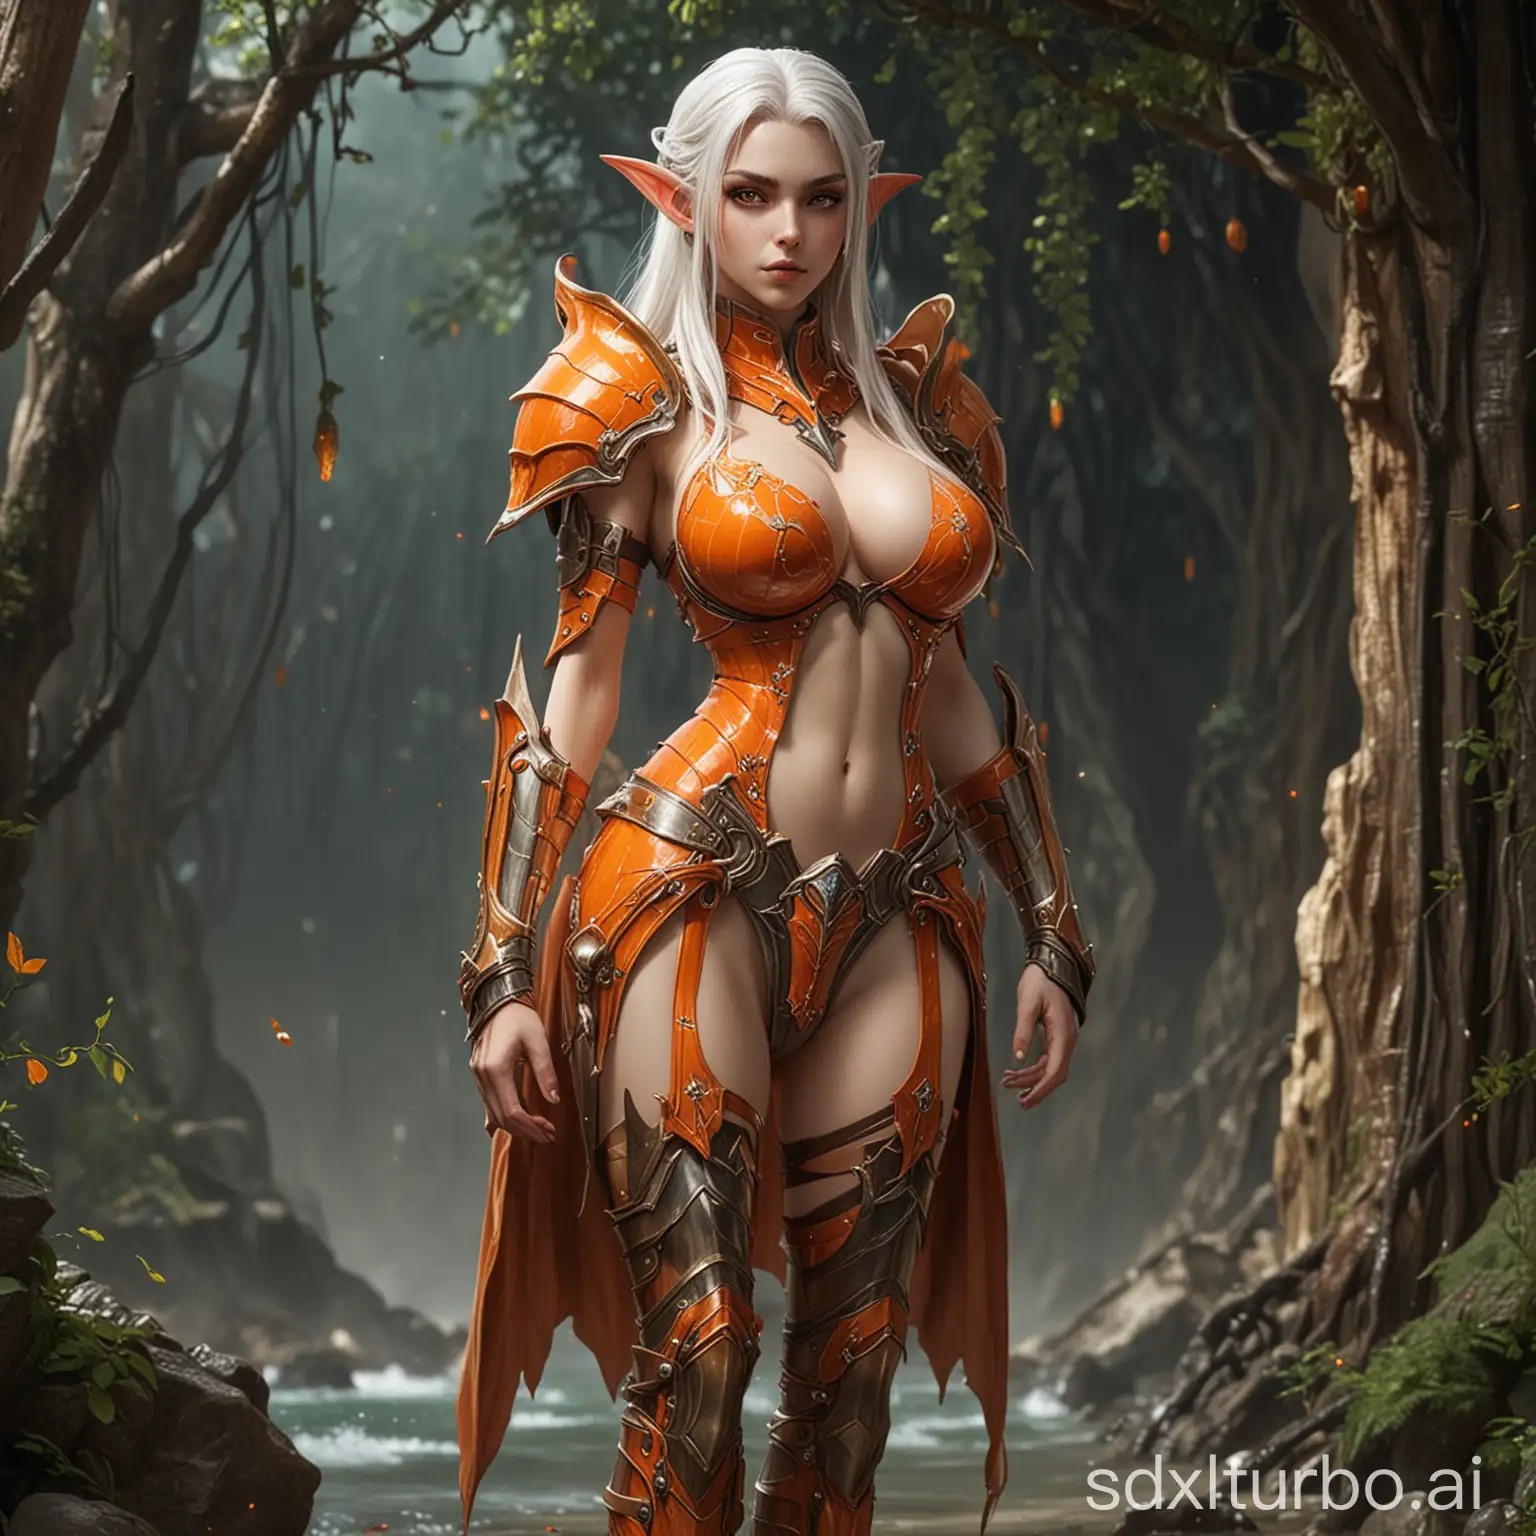 a tall, extremely busty high elf girl with thick thigh legs, thin waist, revealing orange crustacean armor 